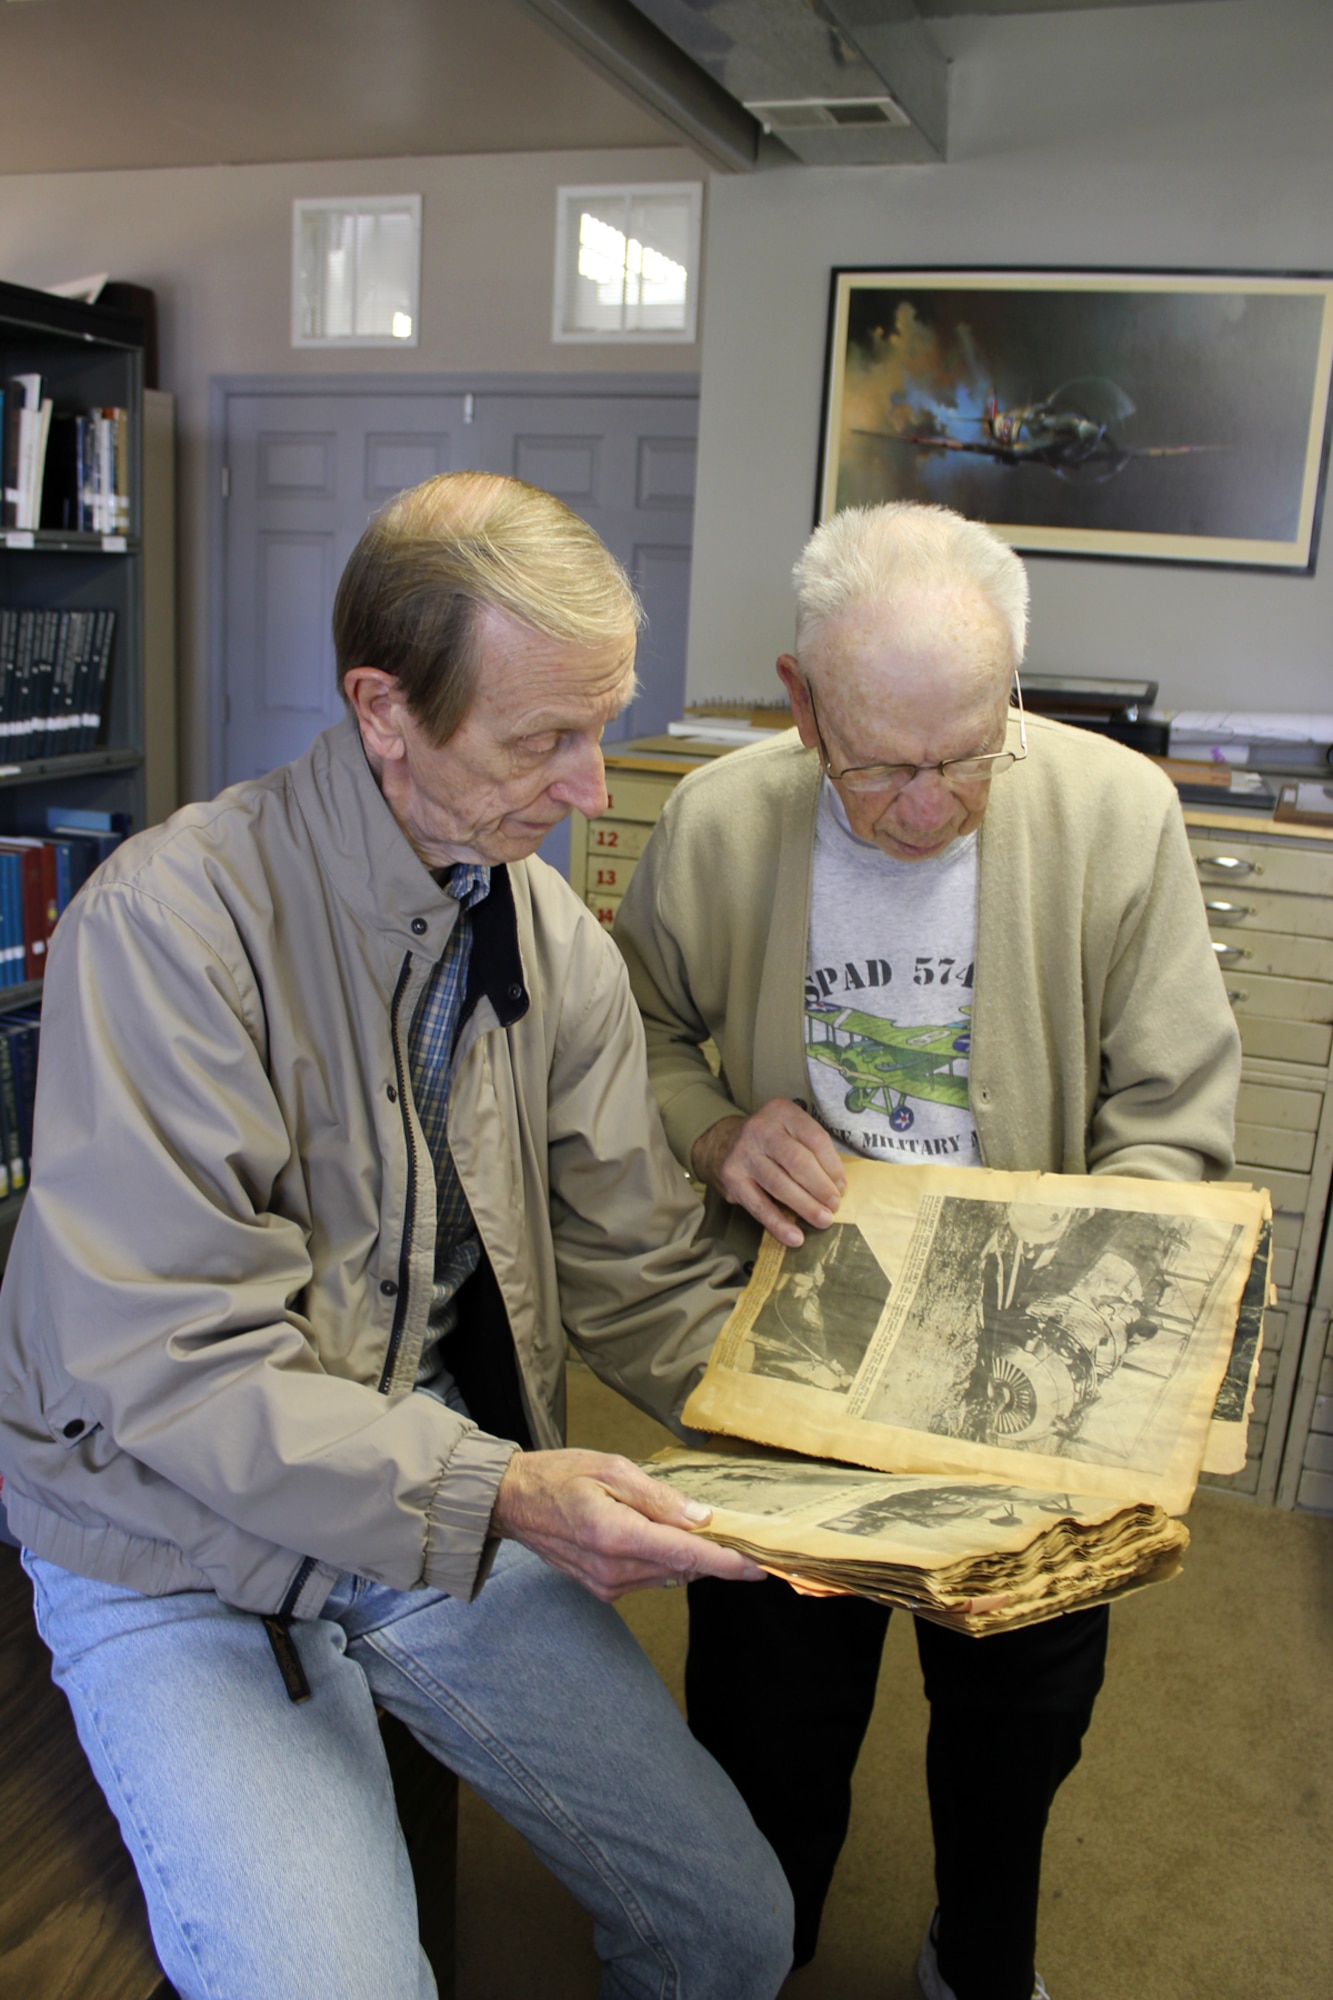 Dick Soules, left, and Frank Brown look at an old scrap book, possibly kept by a child in the 1930s, that is filled with newspaper clippings and other items that track the development of aviation. The scrapbook is a part of the collection of historical materials in the library of the Selfridge Military and Air Museum at Selfridge Air National Guard Base, Mich. The two men are among a group of a half dozen or so museum volunteers who are working on cataloging the various items that exist at the museum, such as the scrapbook. The two men were working at the museum on Oct. 9, 2012. (Air National Guard photo by TSgt. Dan Heaton)